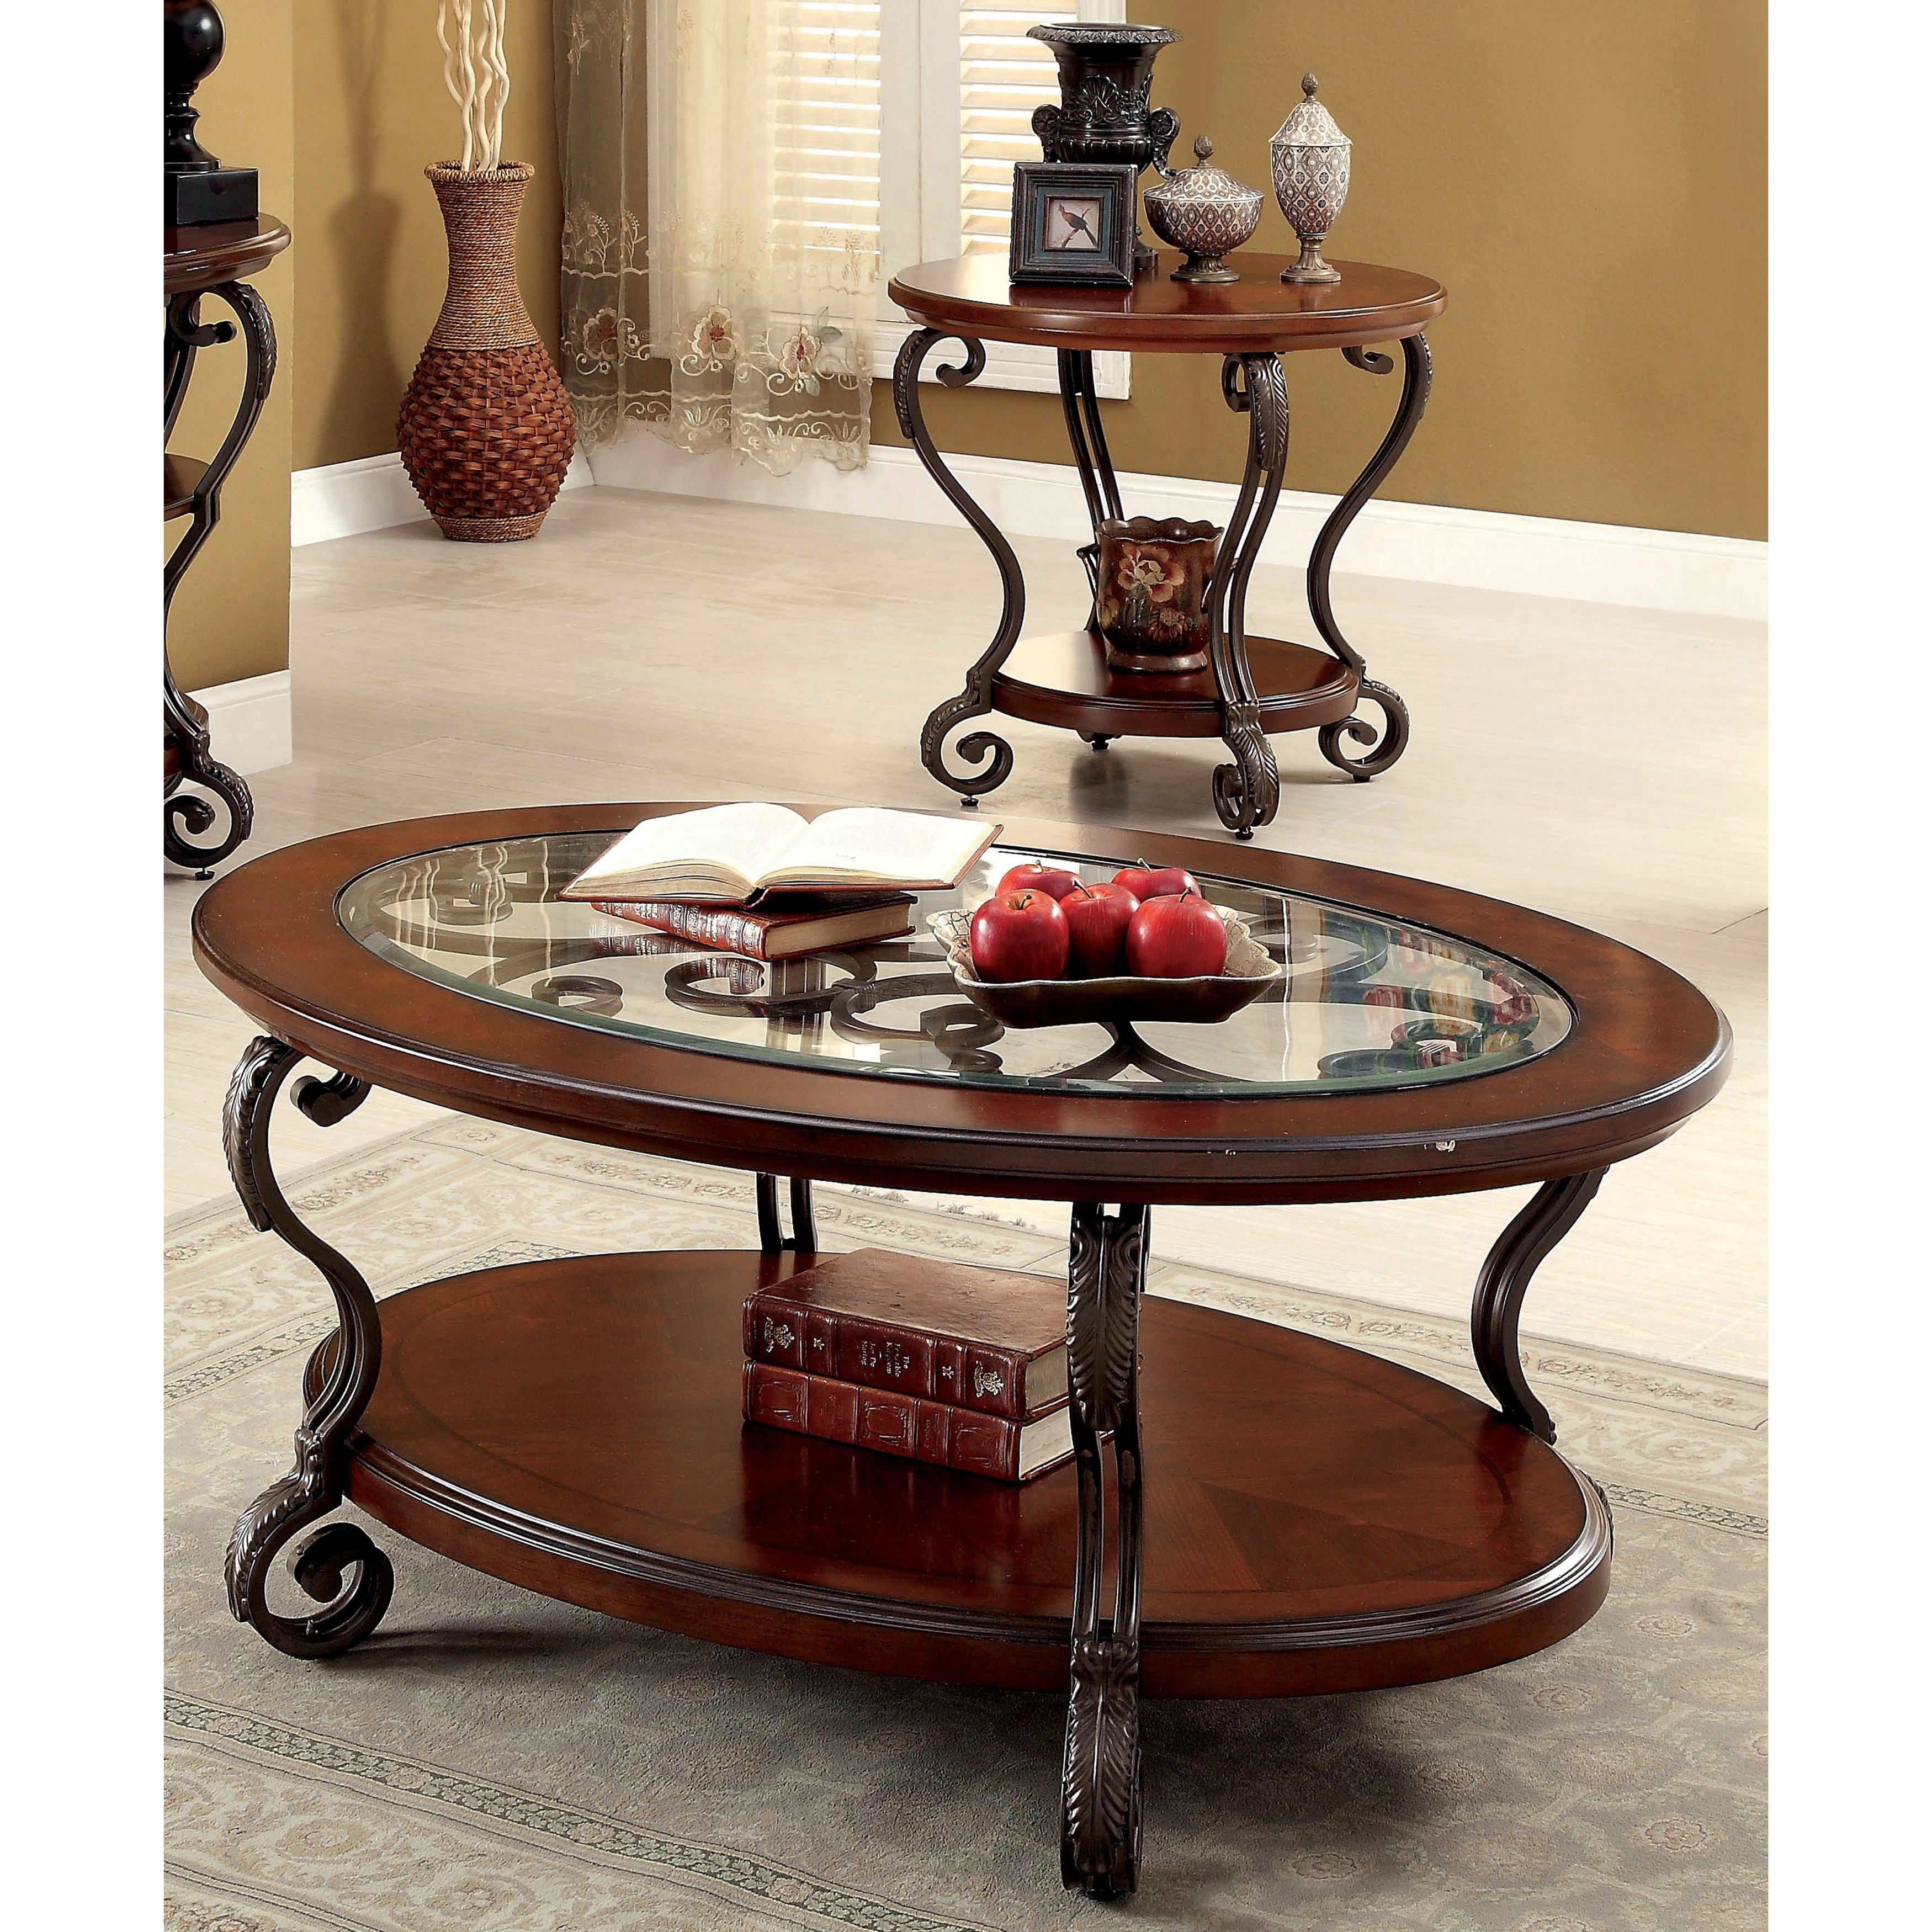 cohler traditional brown cherry piece coffee table set foa wood end tables and acme riverside chairs dog magnussen lakehurst wooden side glass edmonton plum universal furniture